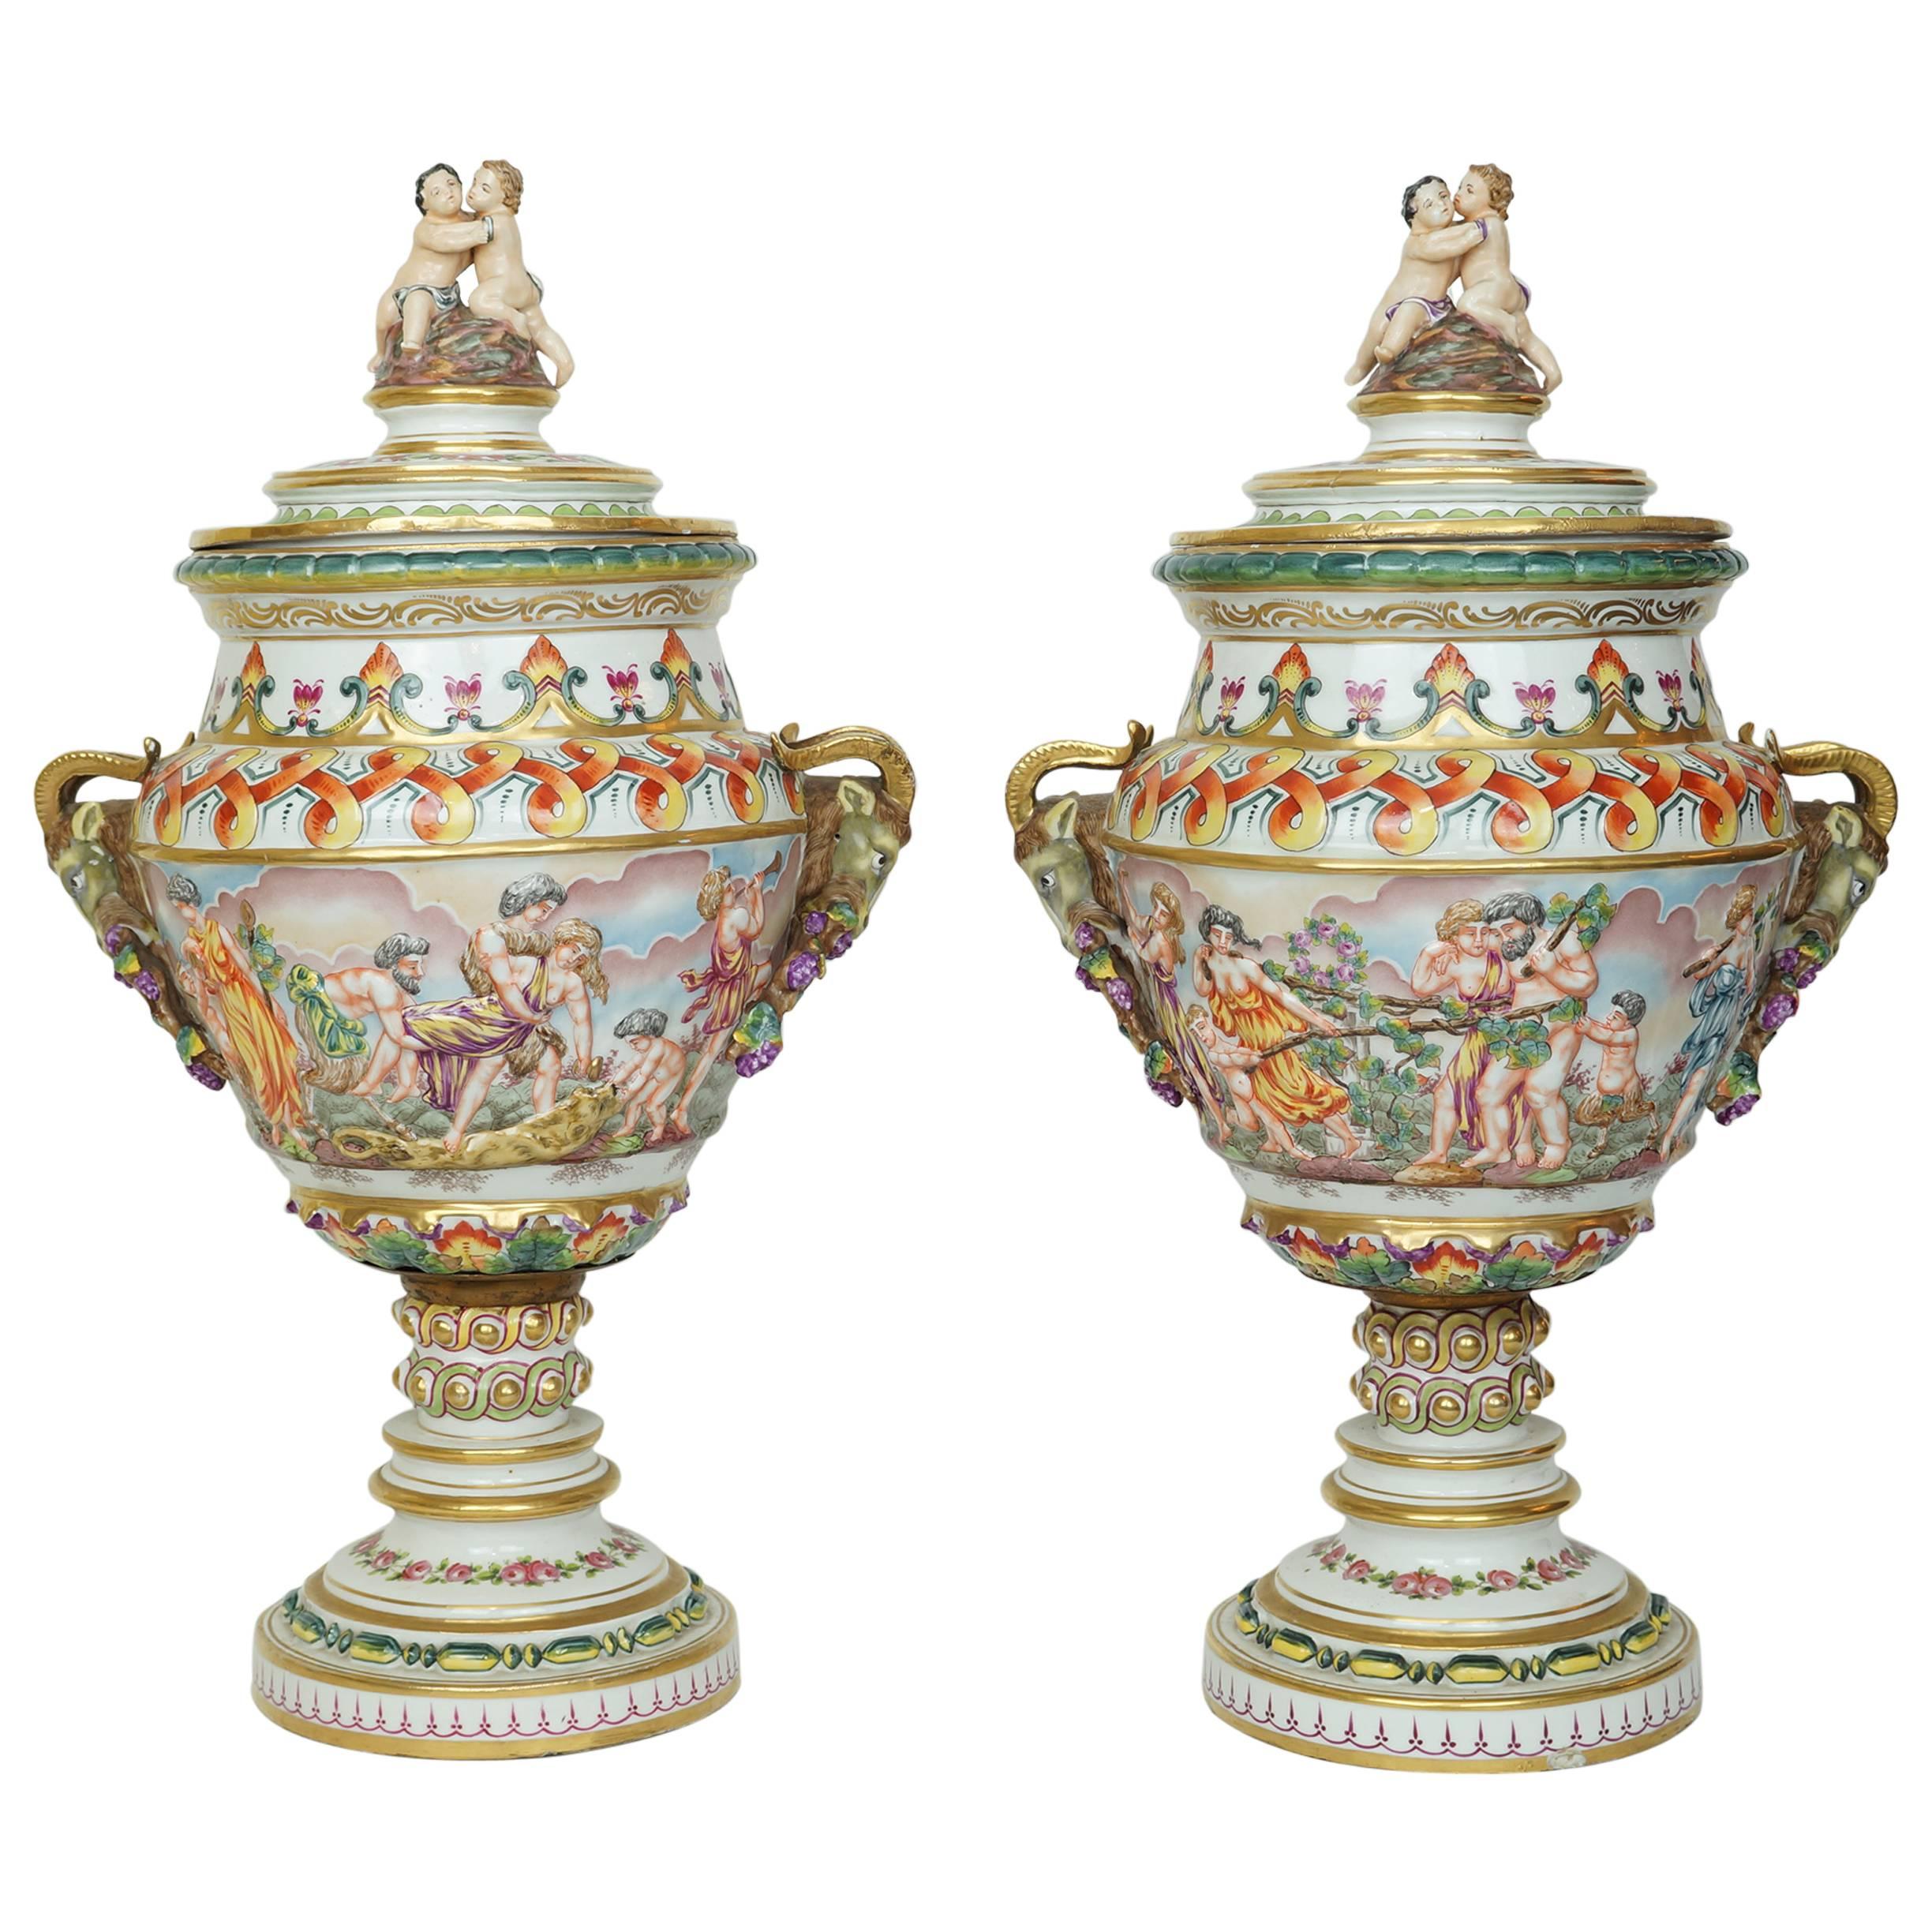 Pair of Porcelain and Bronze Capodimonte Figural Urns with Ram's Head